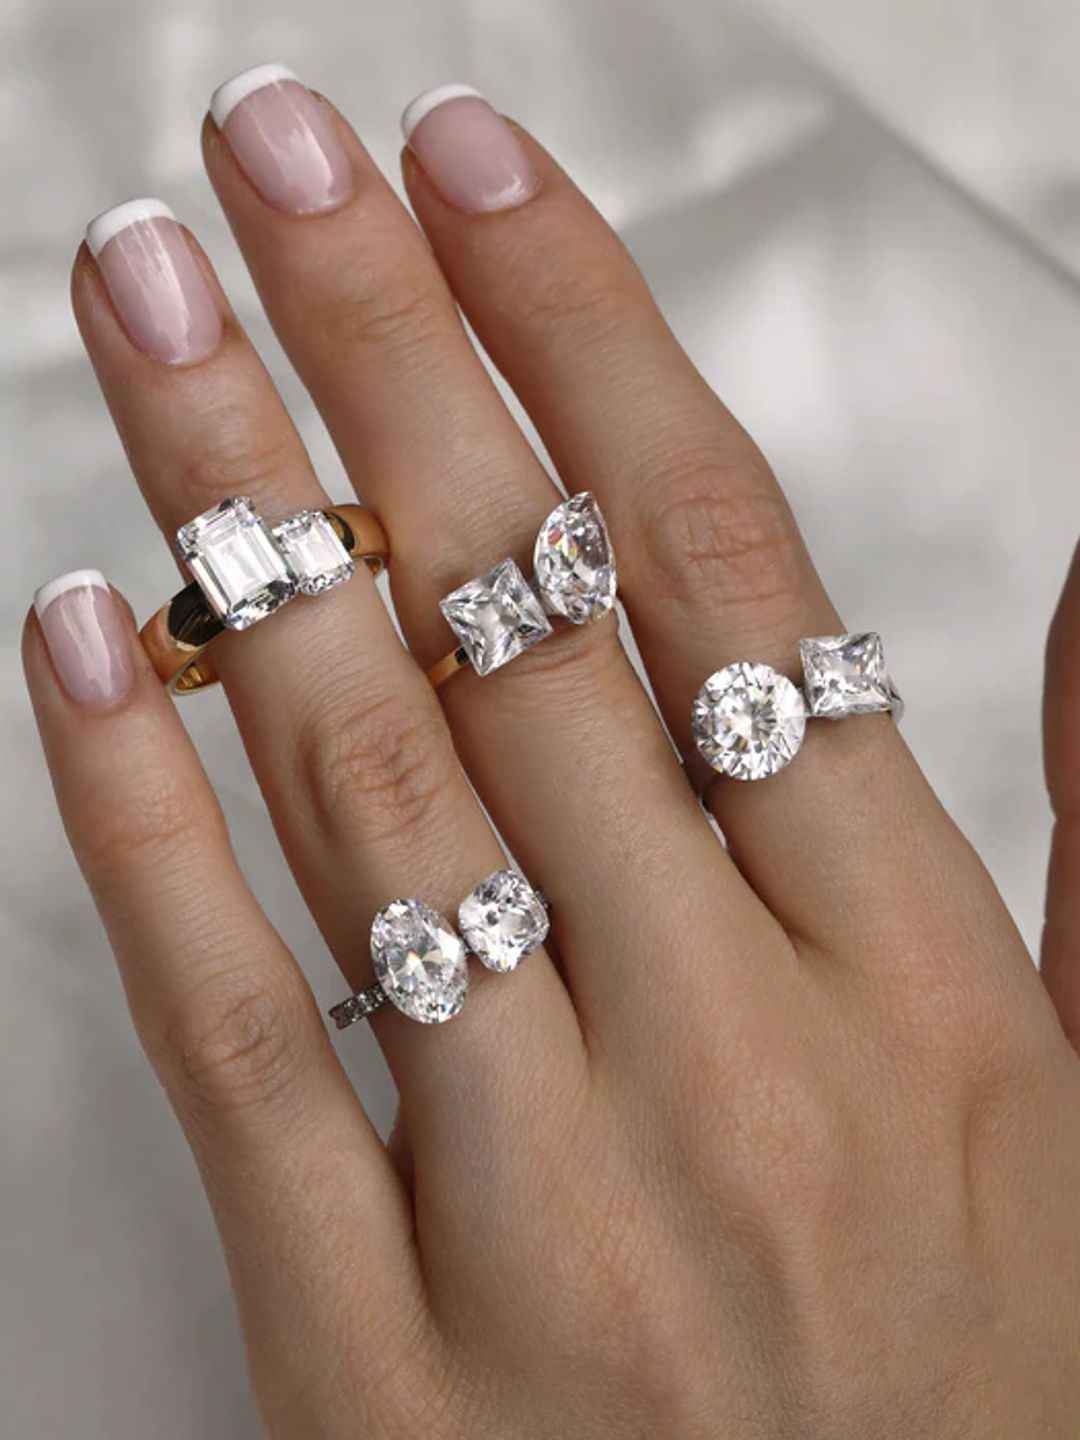 The 'Toi et Moi' ring style has exploded in popularity and is set to be a standout nuptial jewellery trend for 2024 